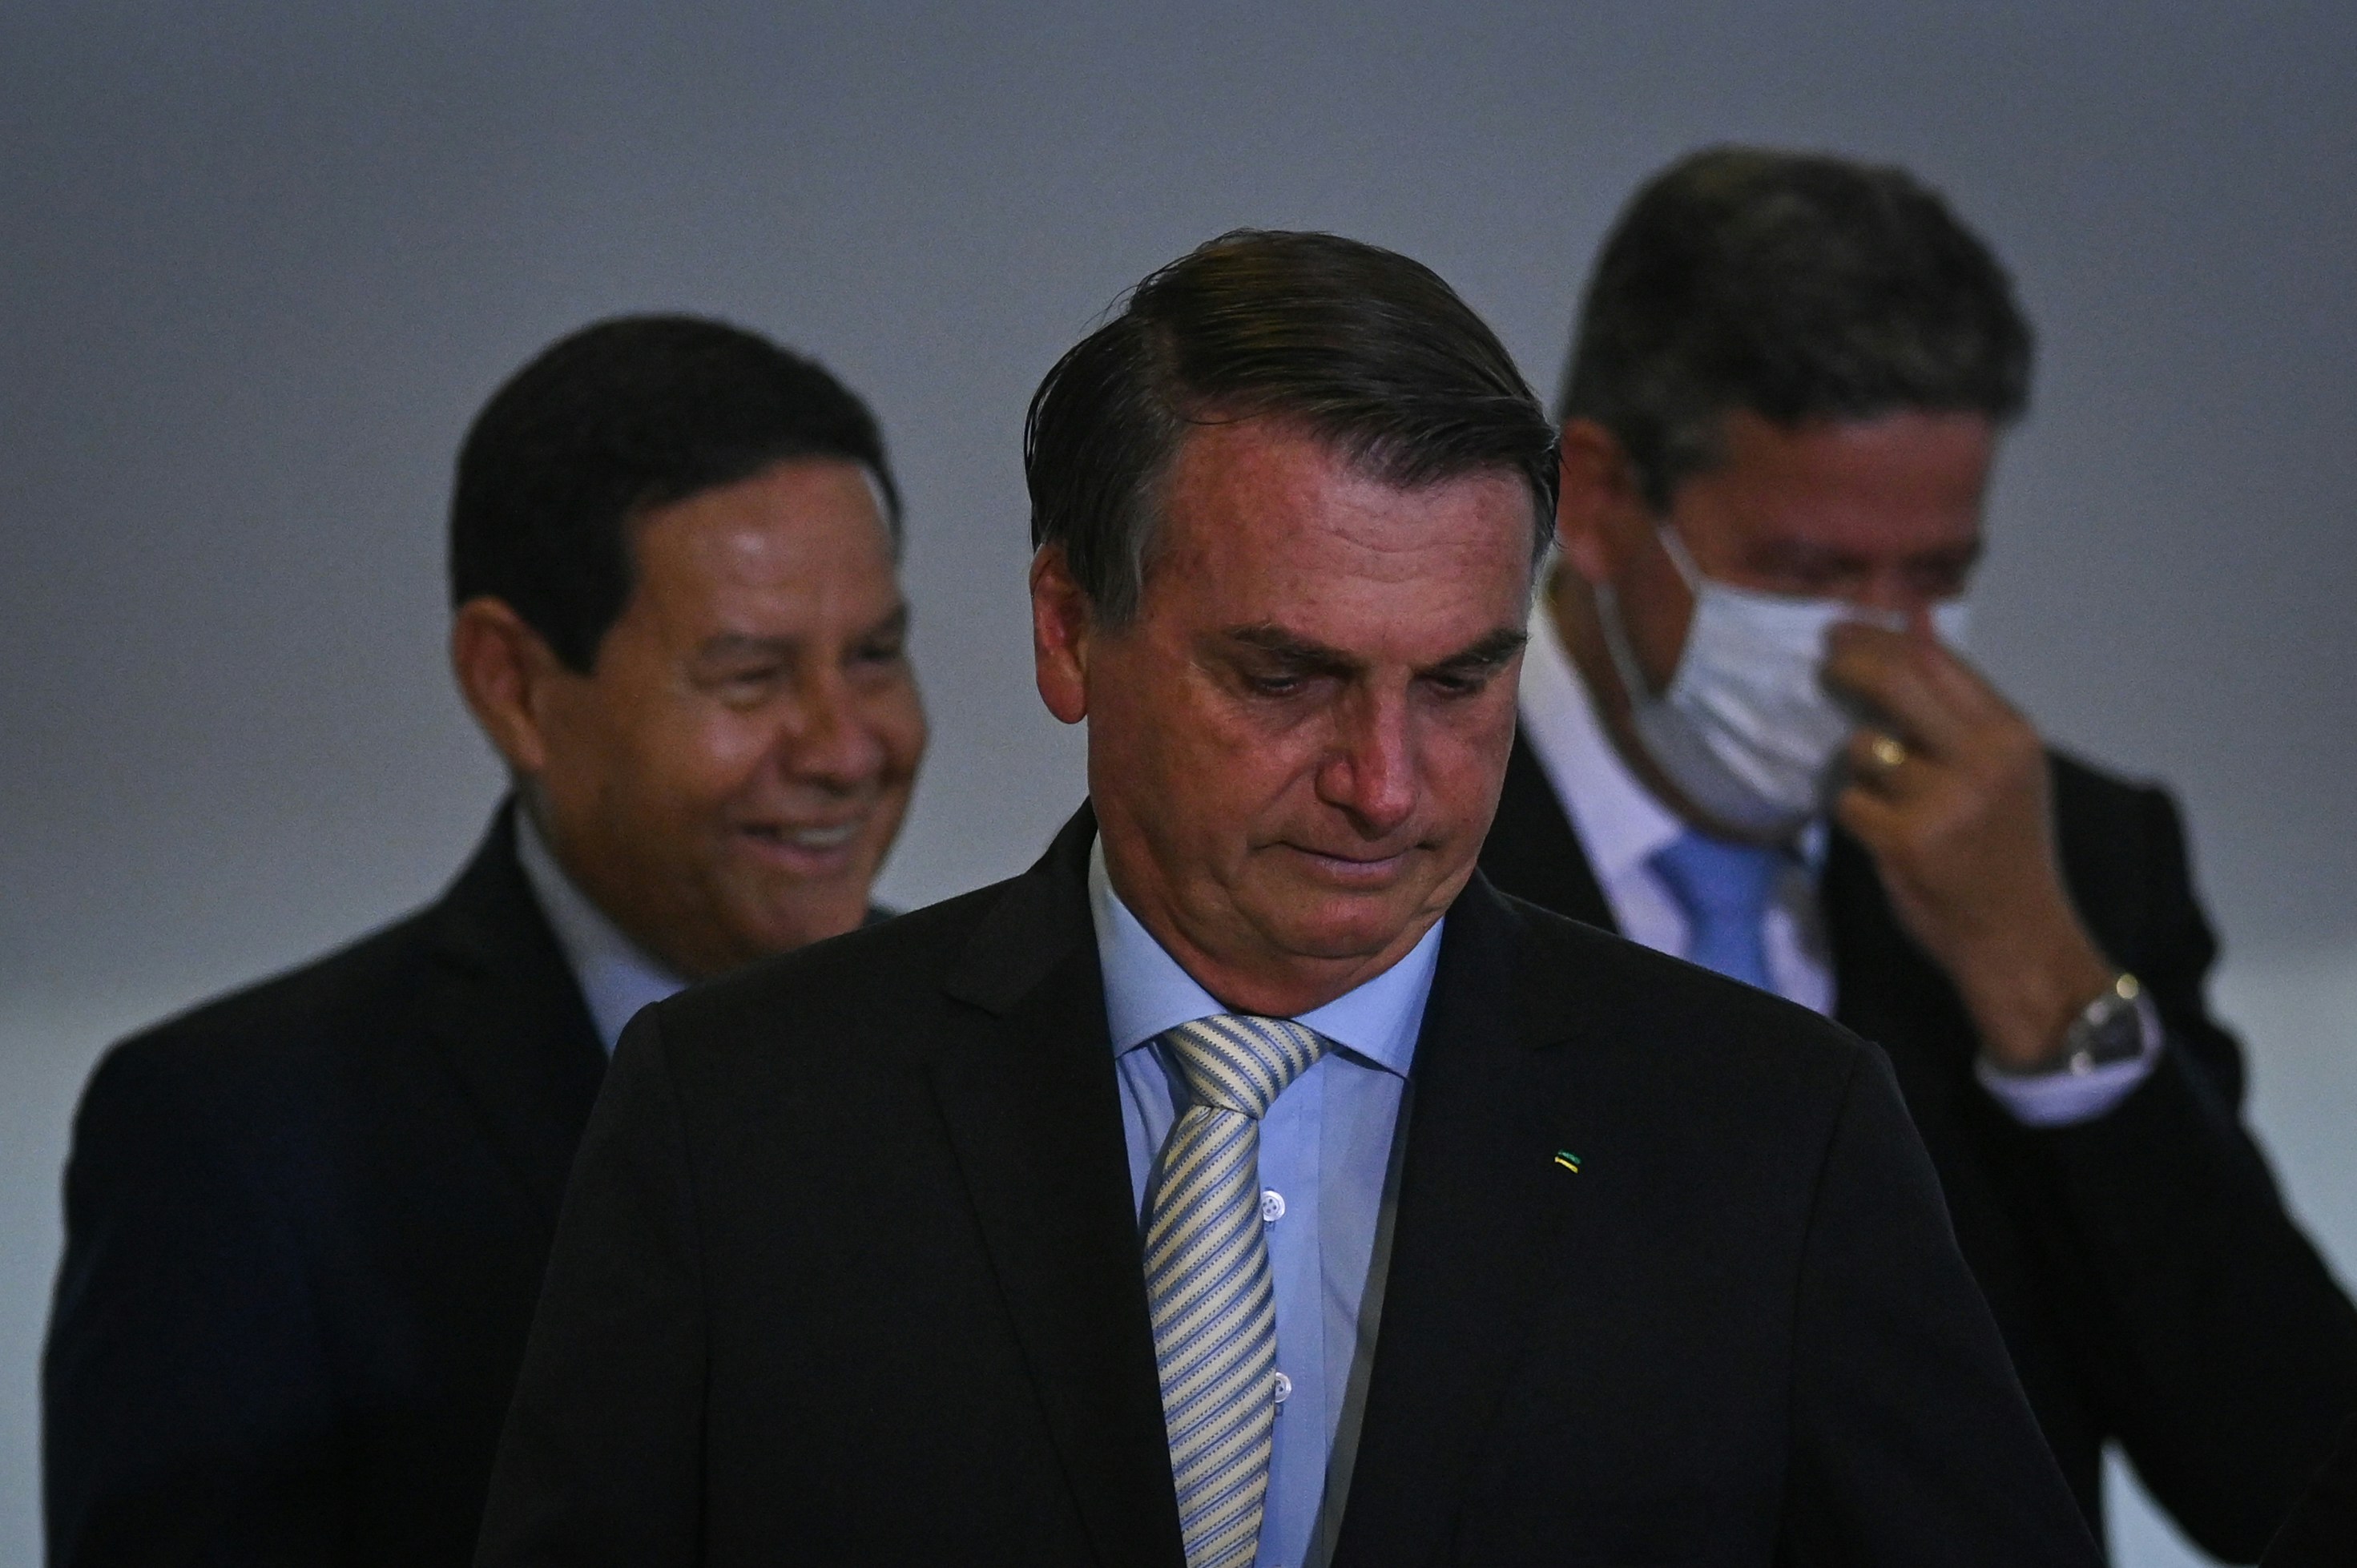 President Bolsonaro And Minister Guedes Attend Ceremony At Planalto Palace